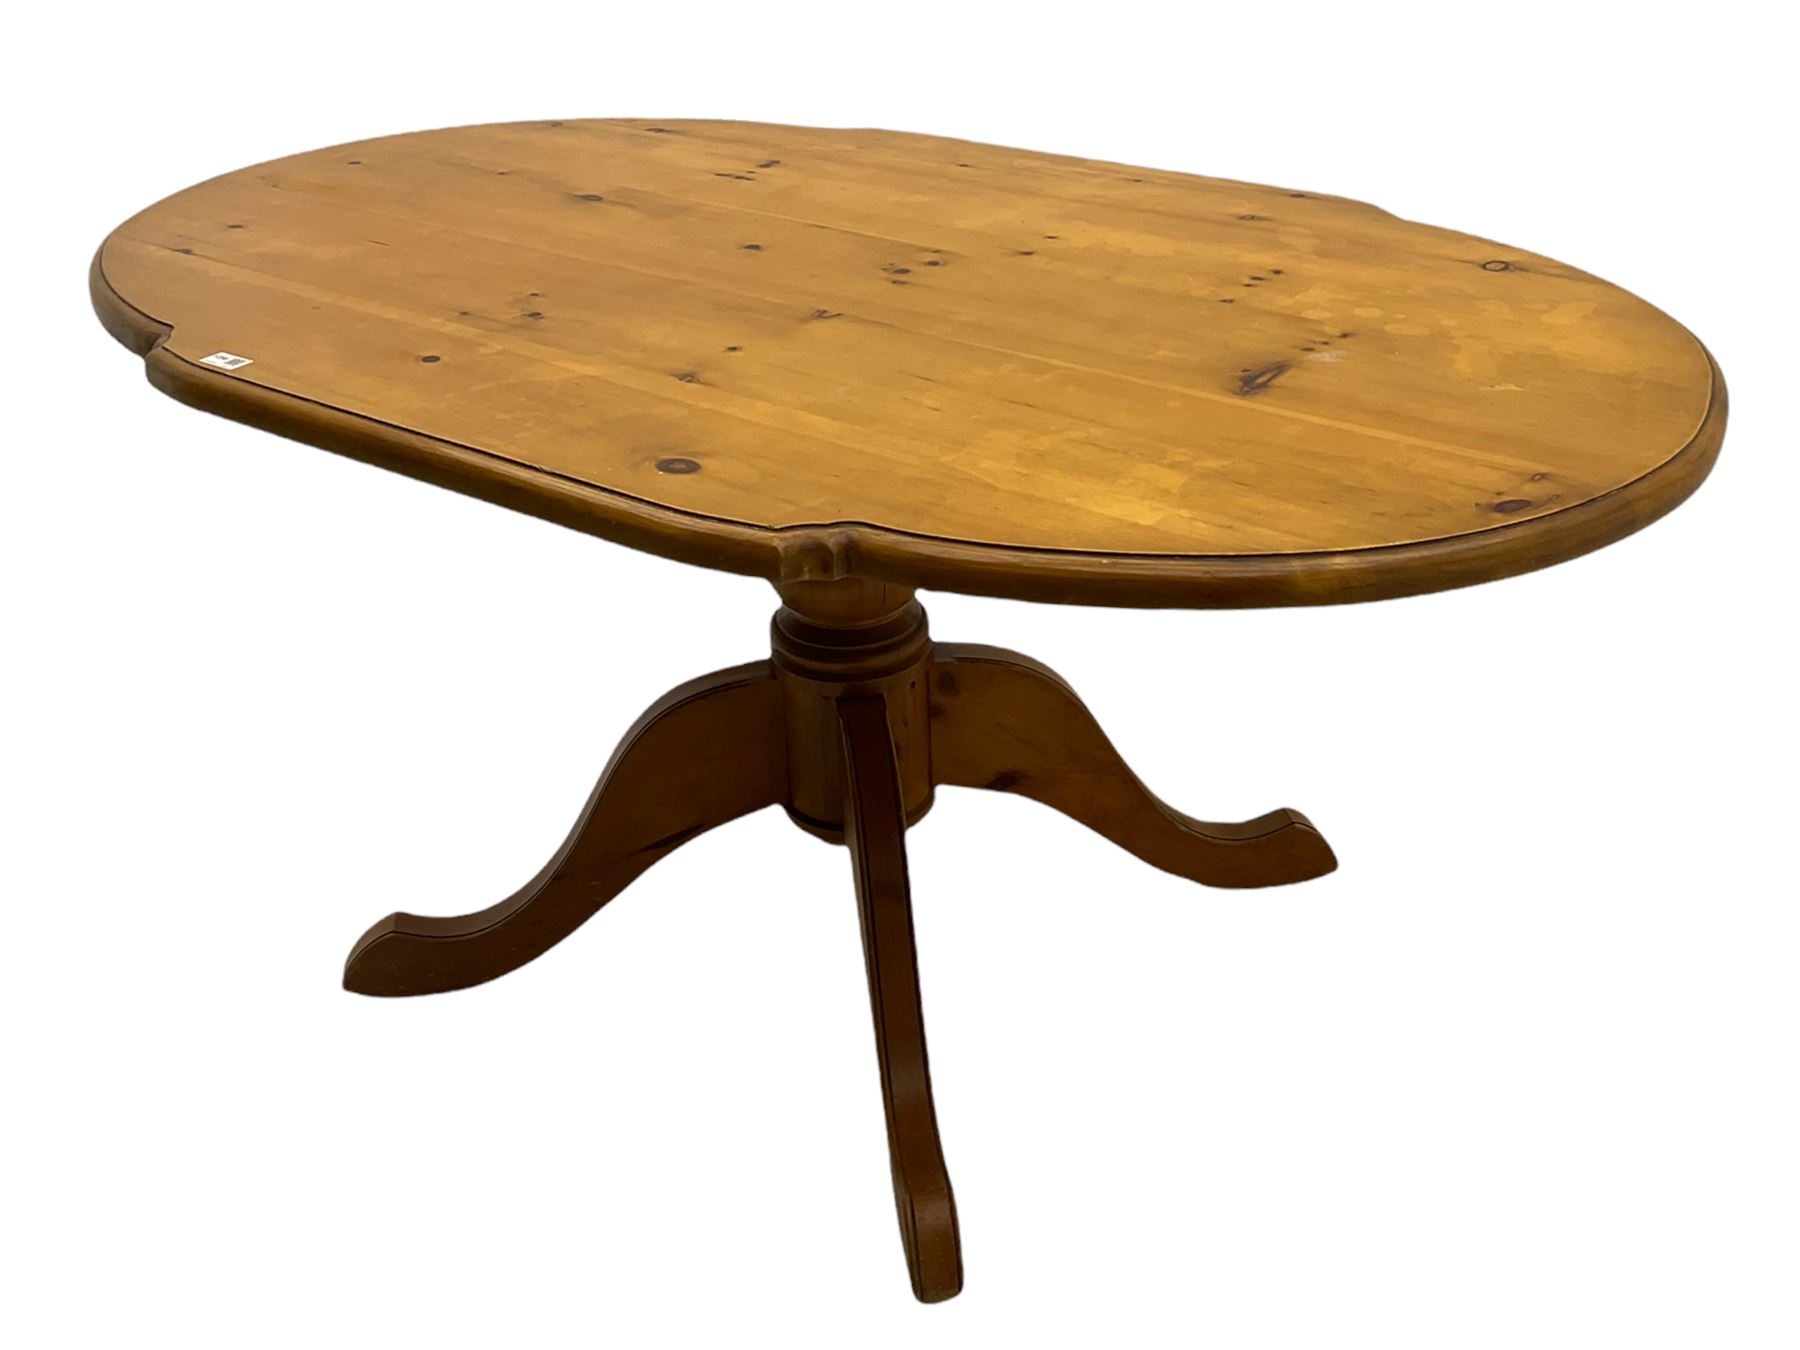 Solid pine oval pedestal dining table - Image 5 of 15